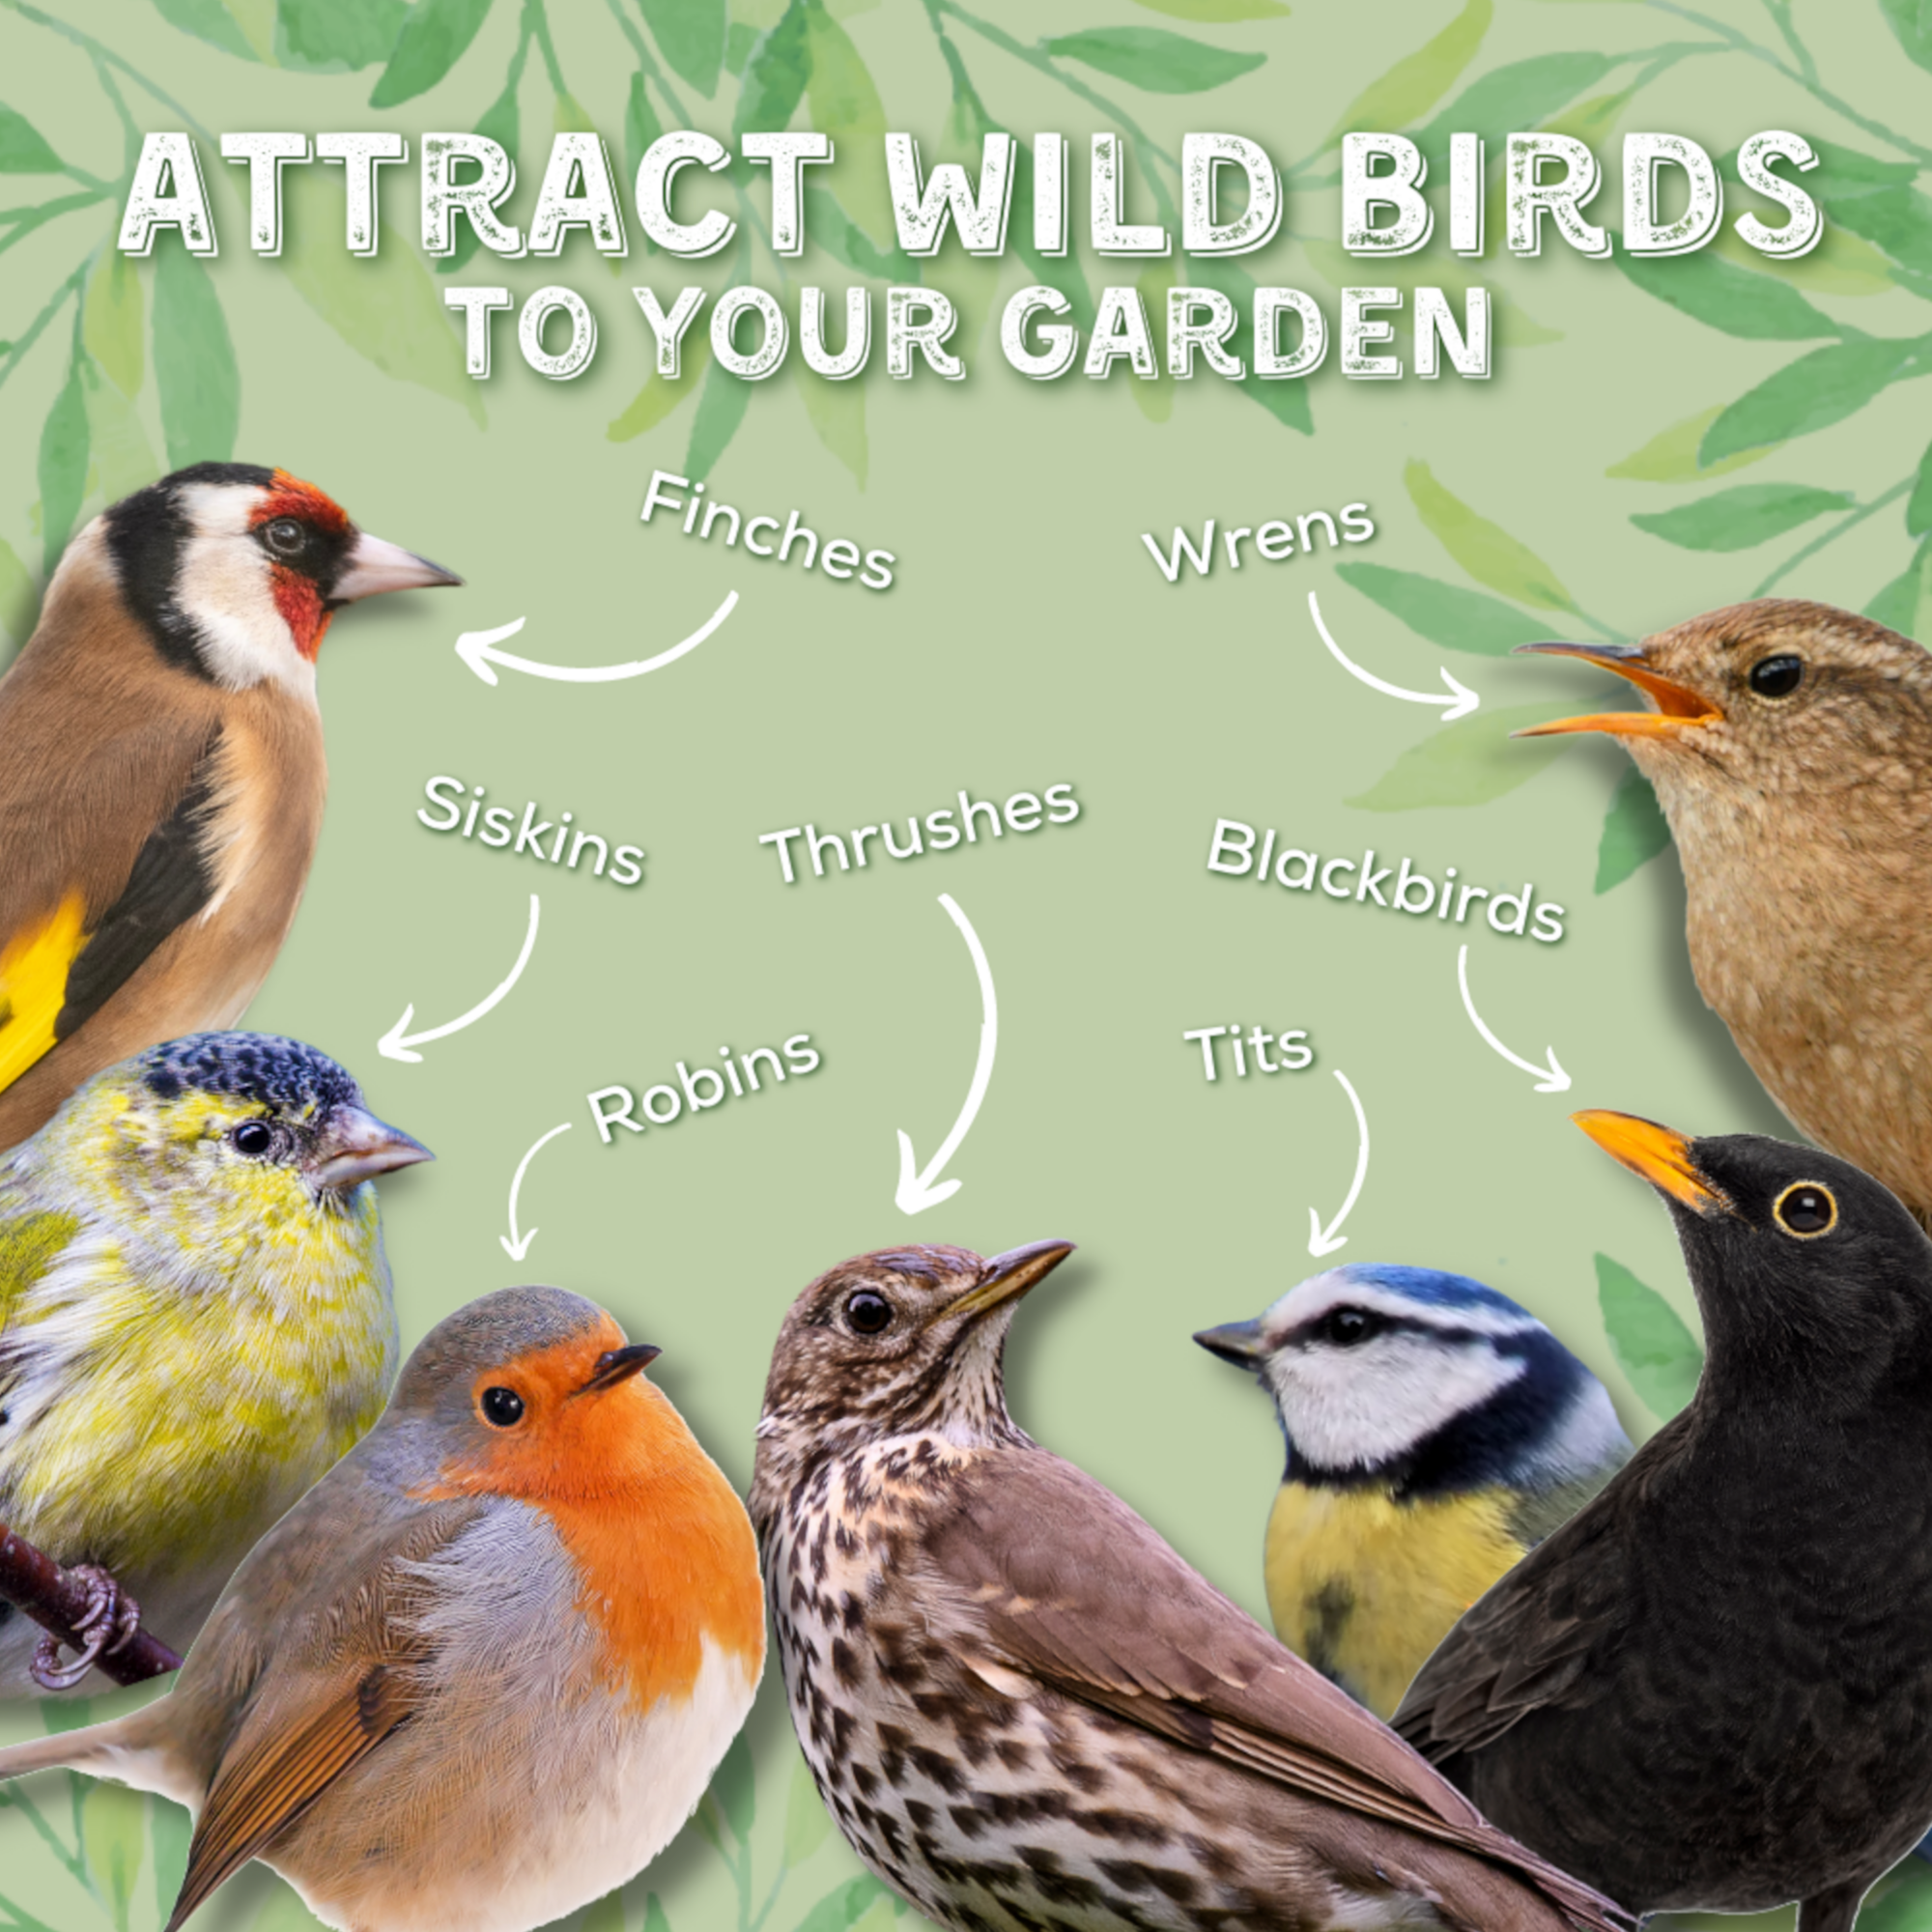 Attract wild birds to your garden: Finches, Wrens, Siskins, Thrushes, Blackbirds, Robins, Tits